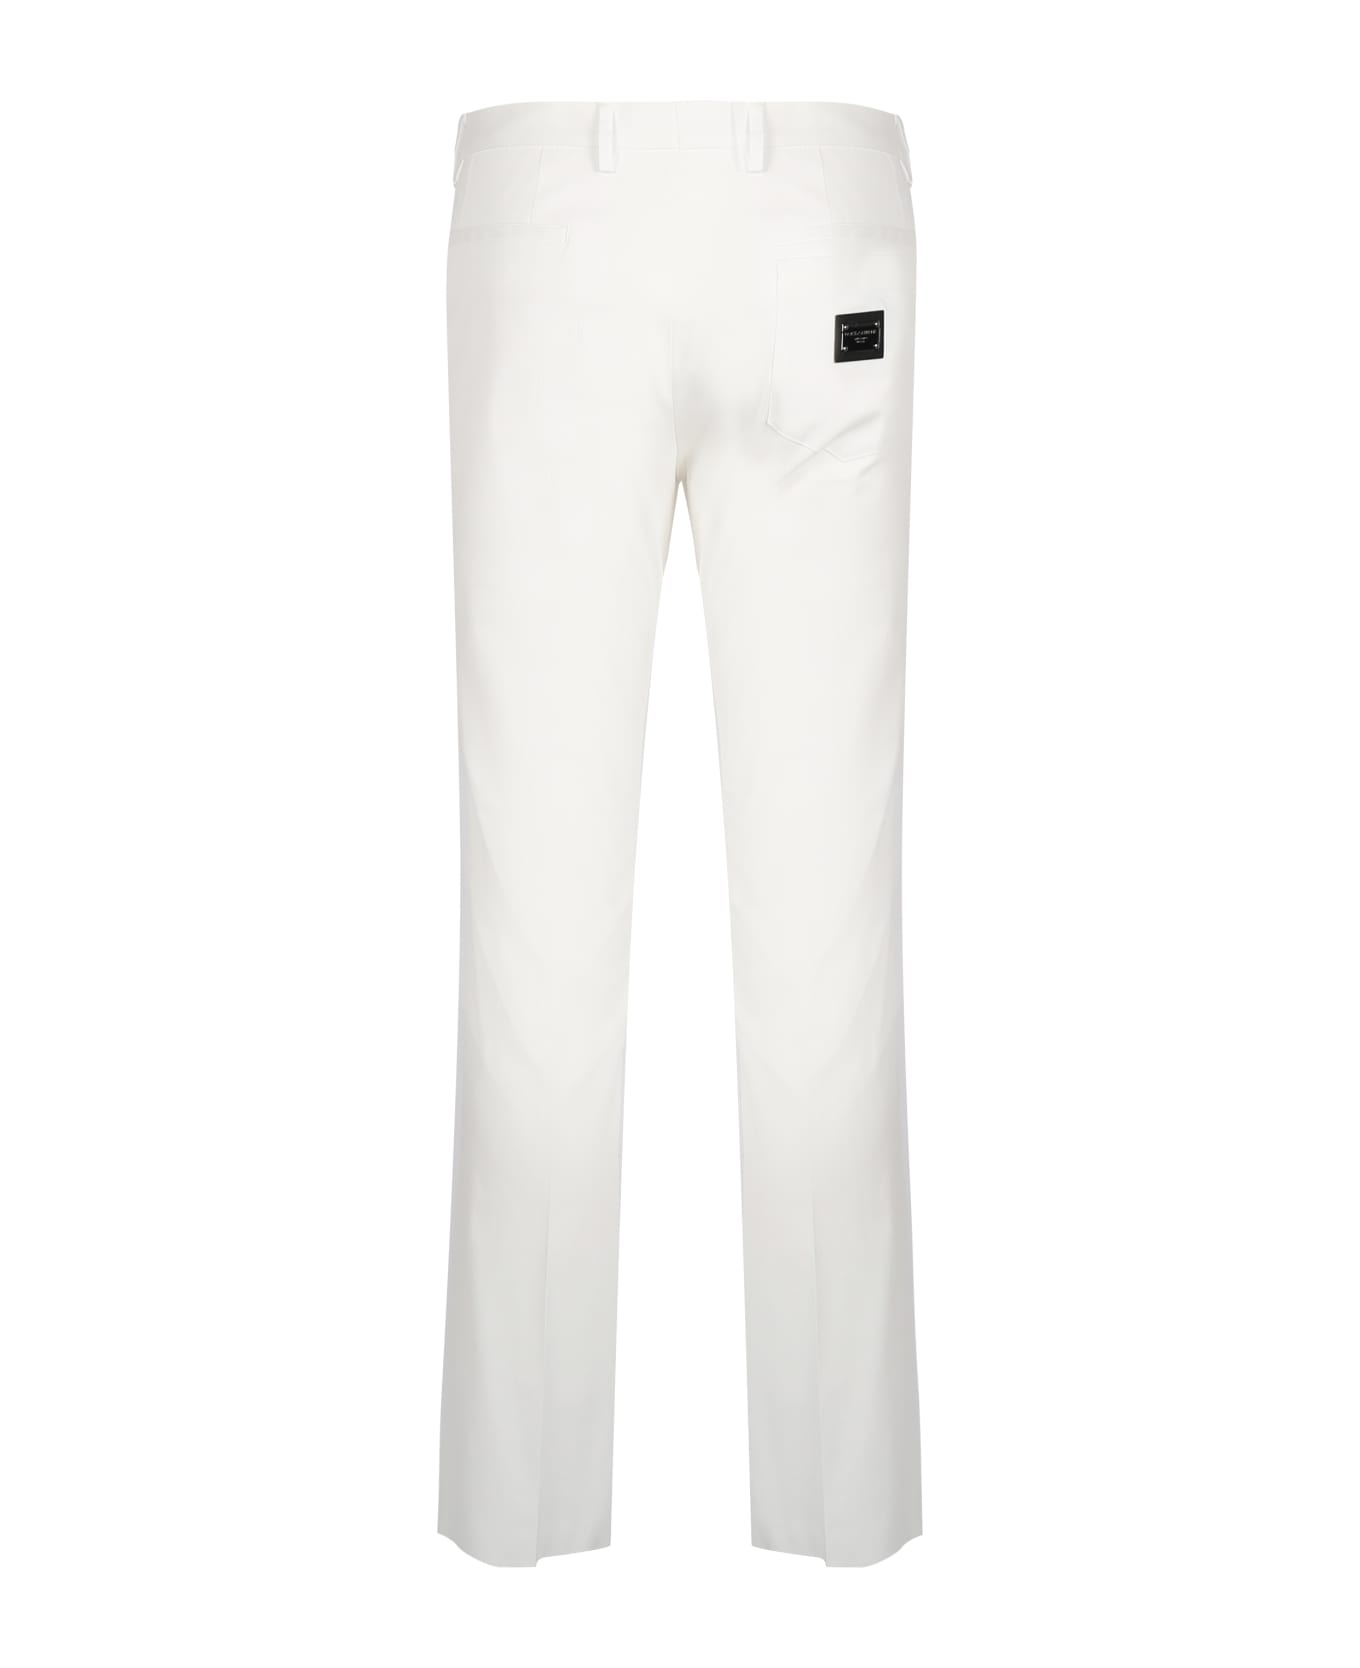 Dolce & Gabbana Stretch Cotton Trousers With Logoed Plaque - White ボトムス